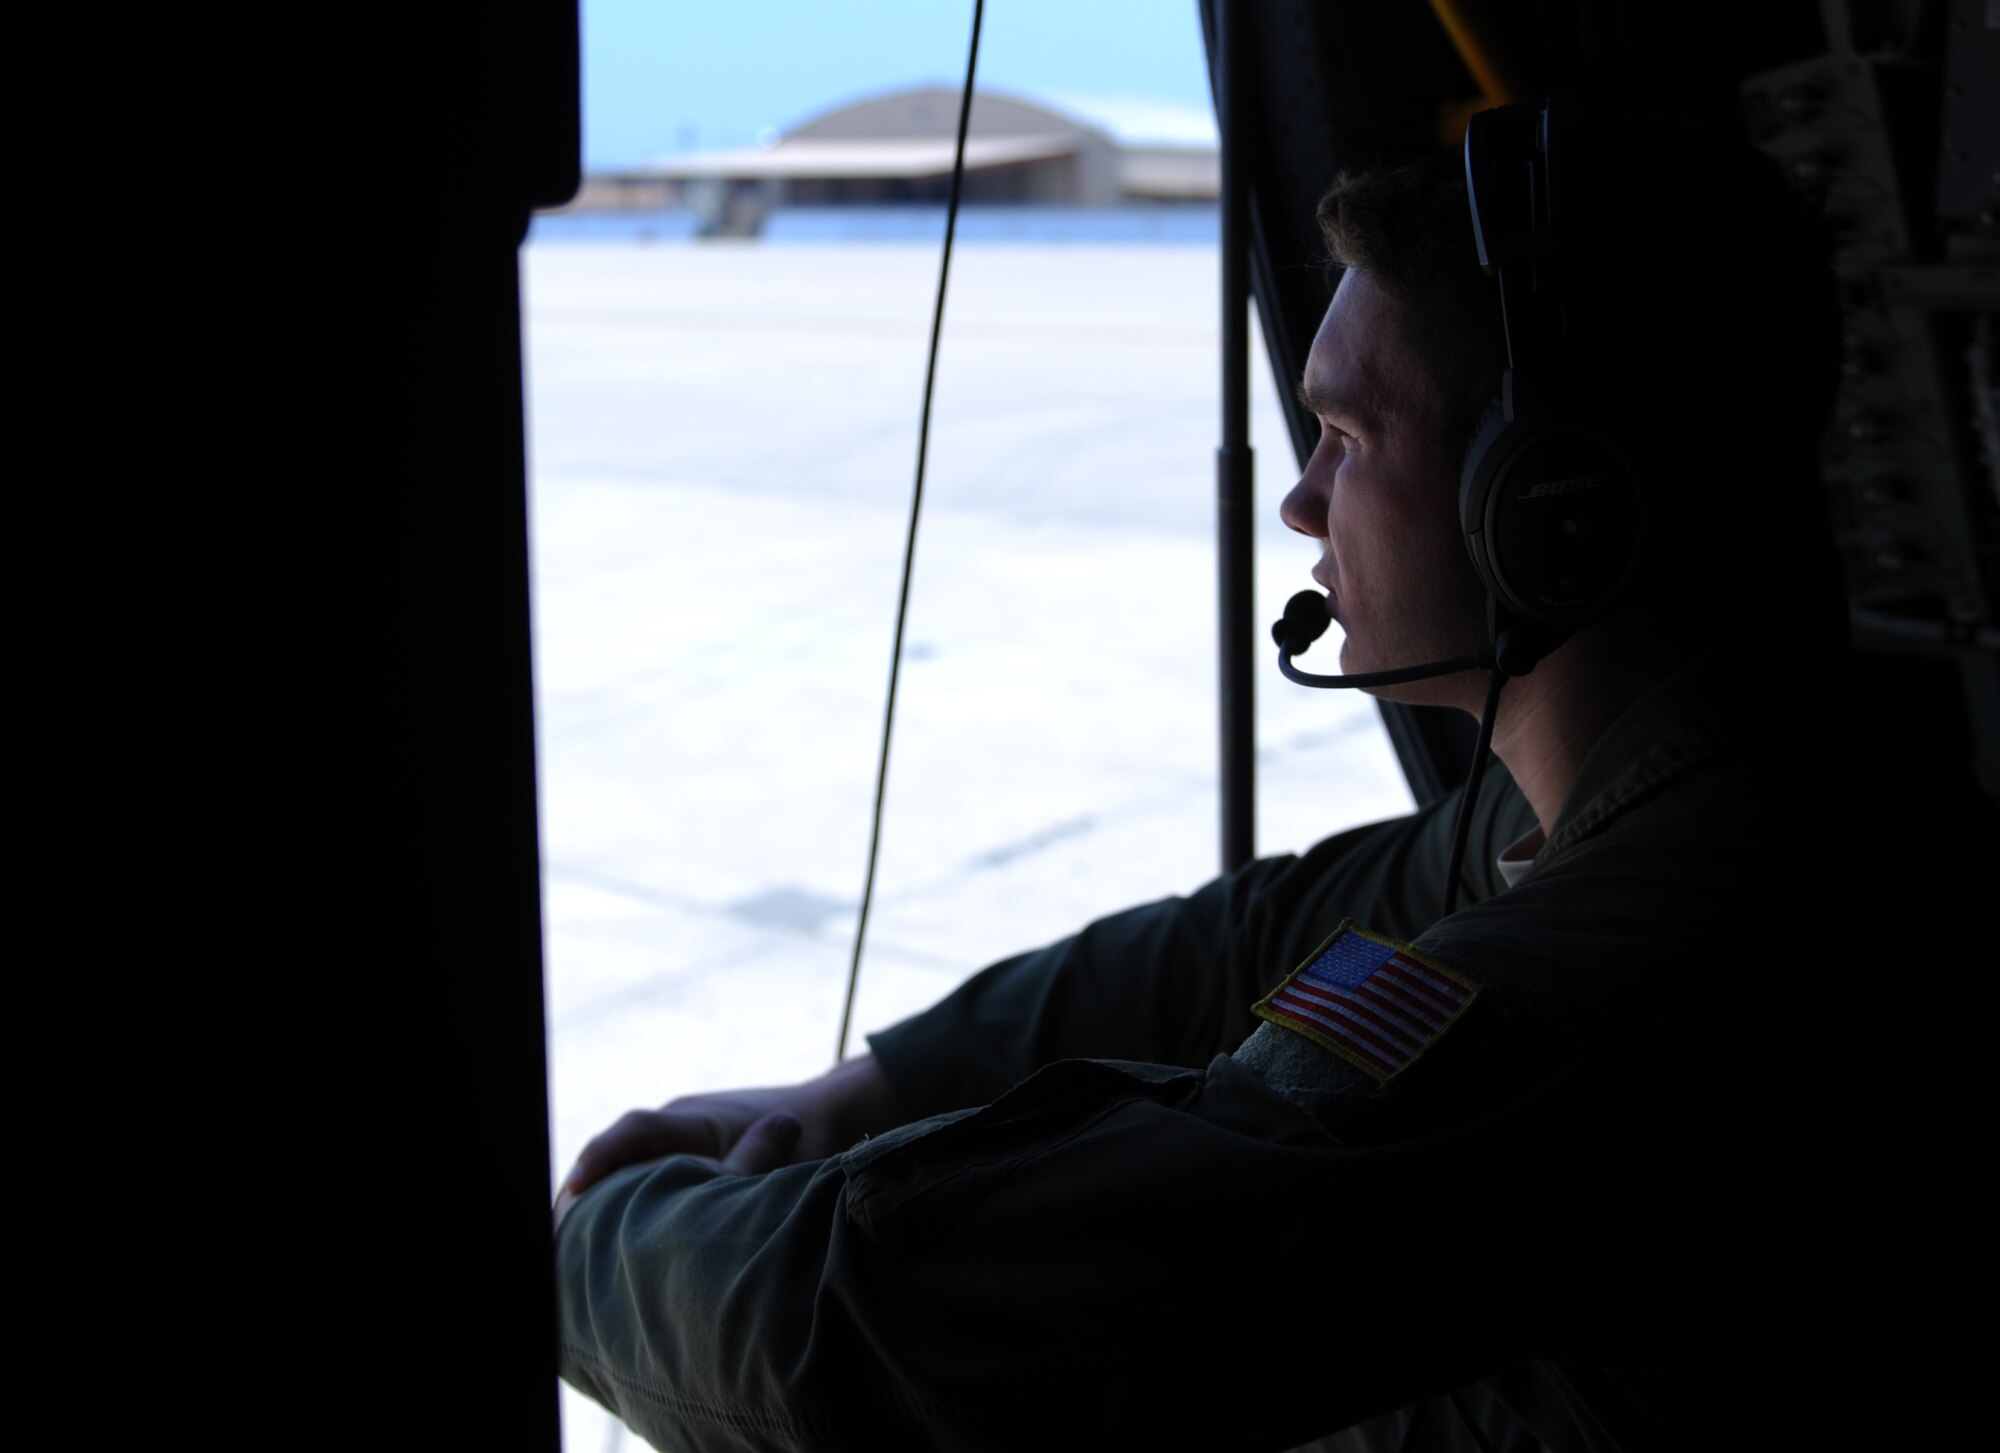 U.S. Air Force Airman 1st Class Jacob Betts, 40th Airlift Squadron loadmaster, sits in the doorway of a C-130J Super Hercules after completing a training exercise July 23, 2014, at Naval Air Station Joint Reserve Base Fort Worth, Texas. The exercise demonstrated the C-130J capabilities that will be used during Red Flag-Alaska, where more than 100 aircraft will participate in multiple exercises. (U.S. Air Force photo by Airman 1st Class Kedesha Pennant/Released)